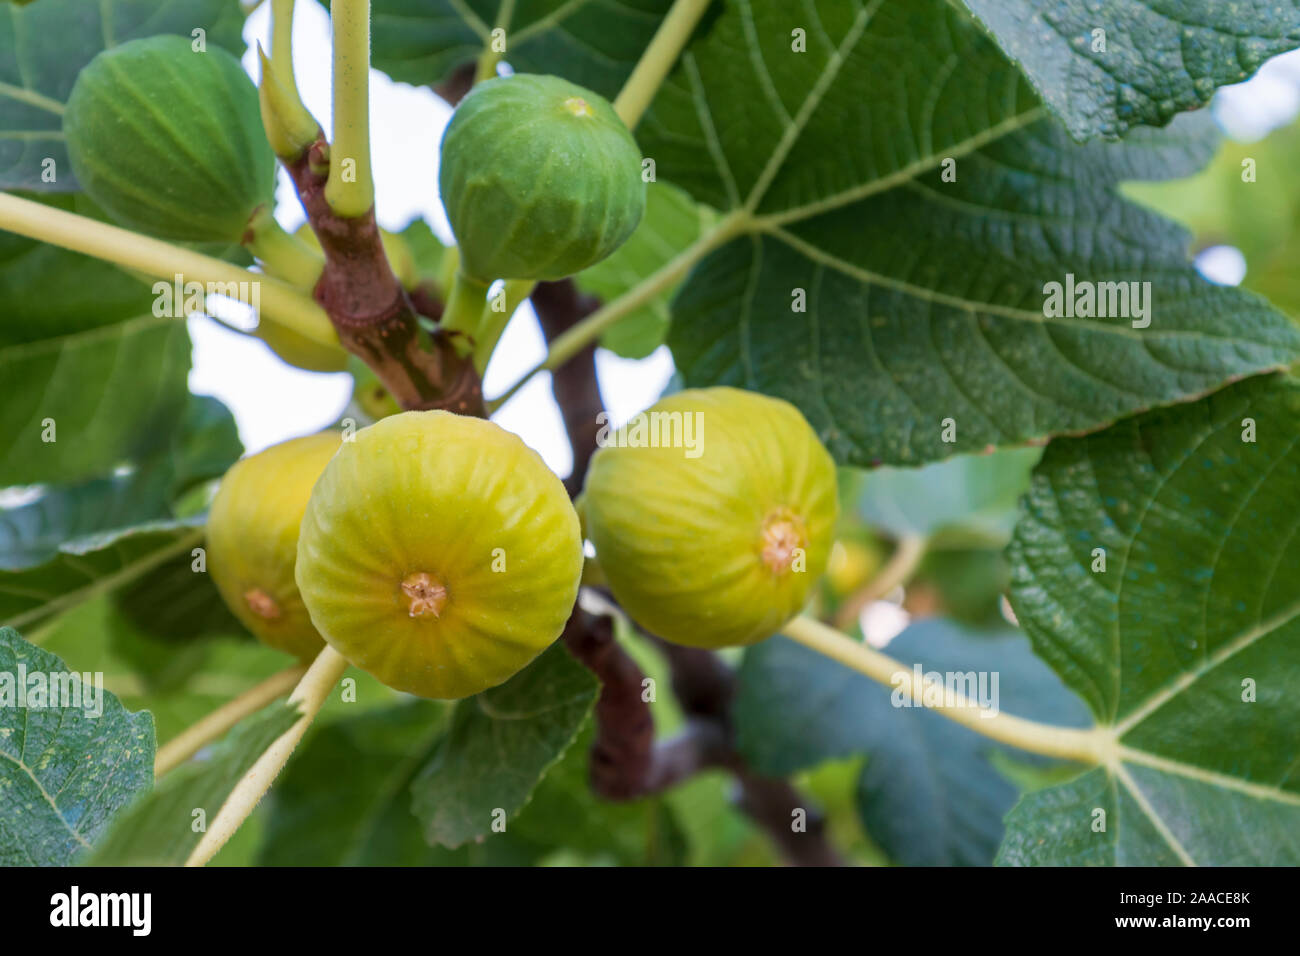 yellow and green figs hang on a branch full of leaves to mature in the sun Stock Photo